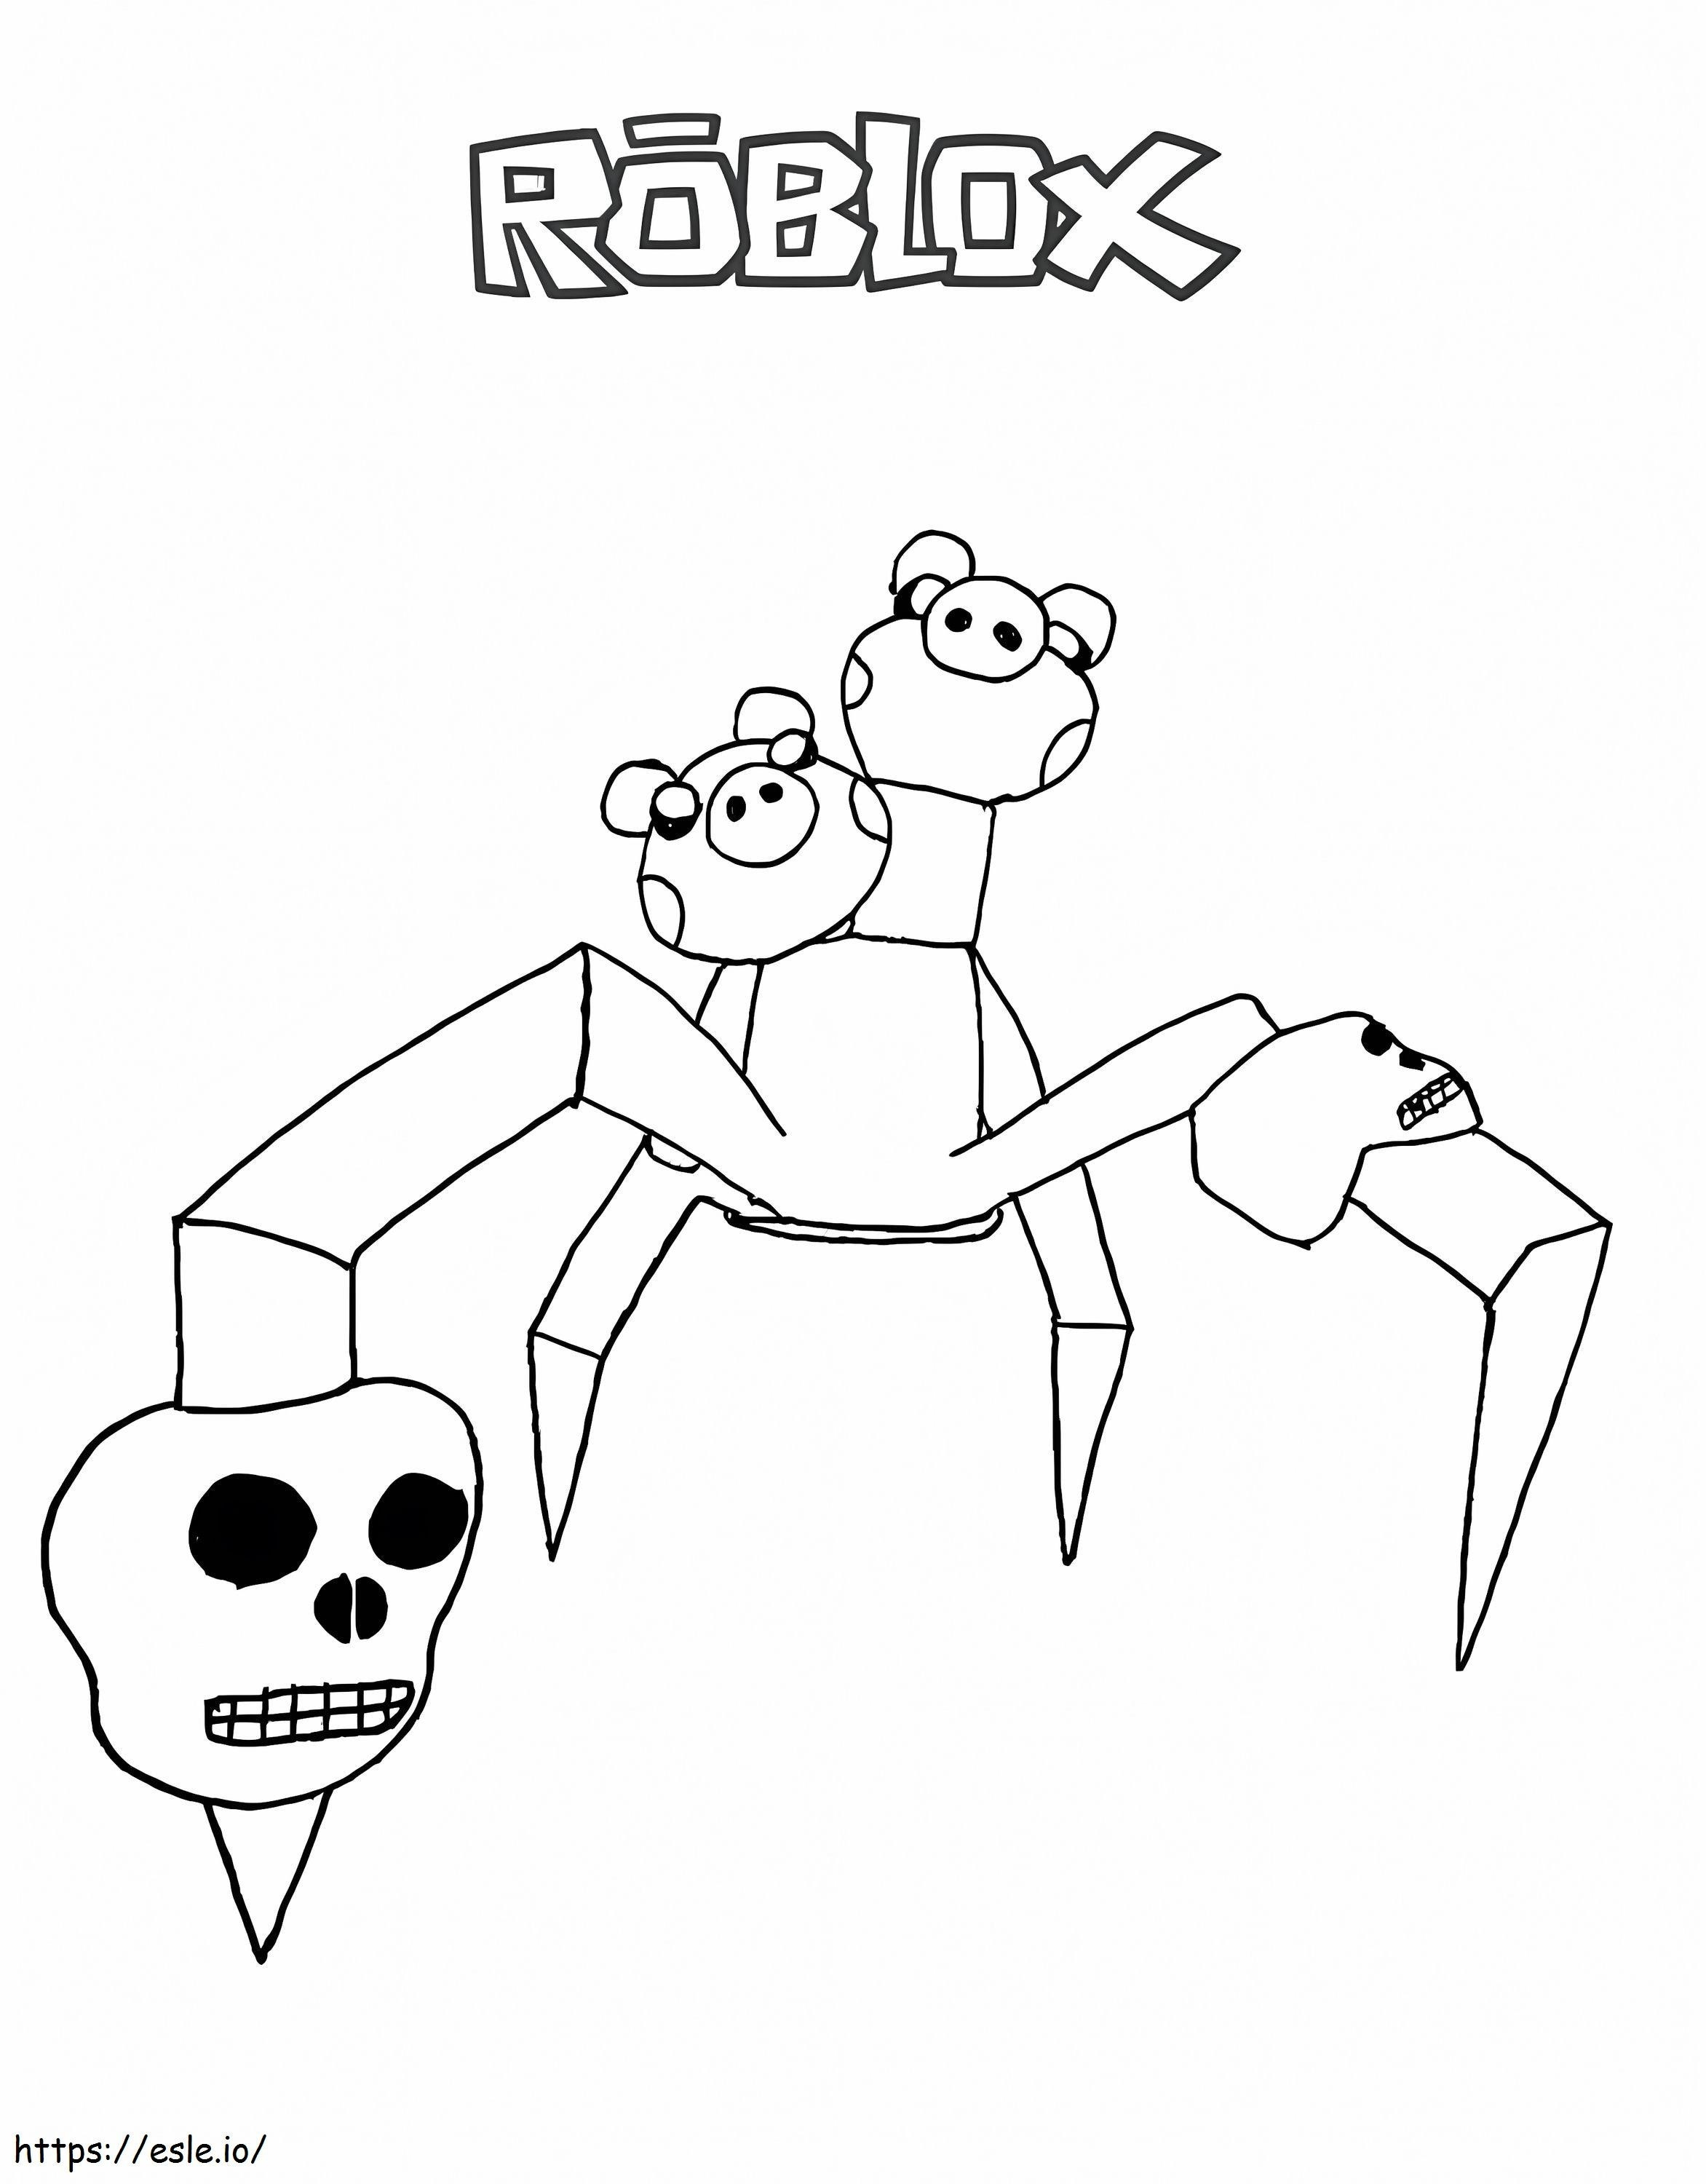 Roblox Spider Pig coloring page